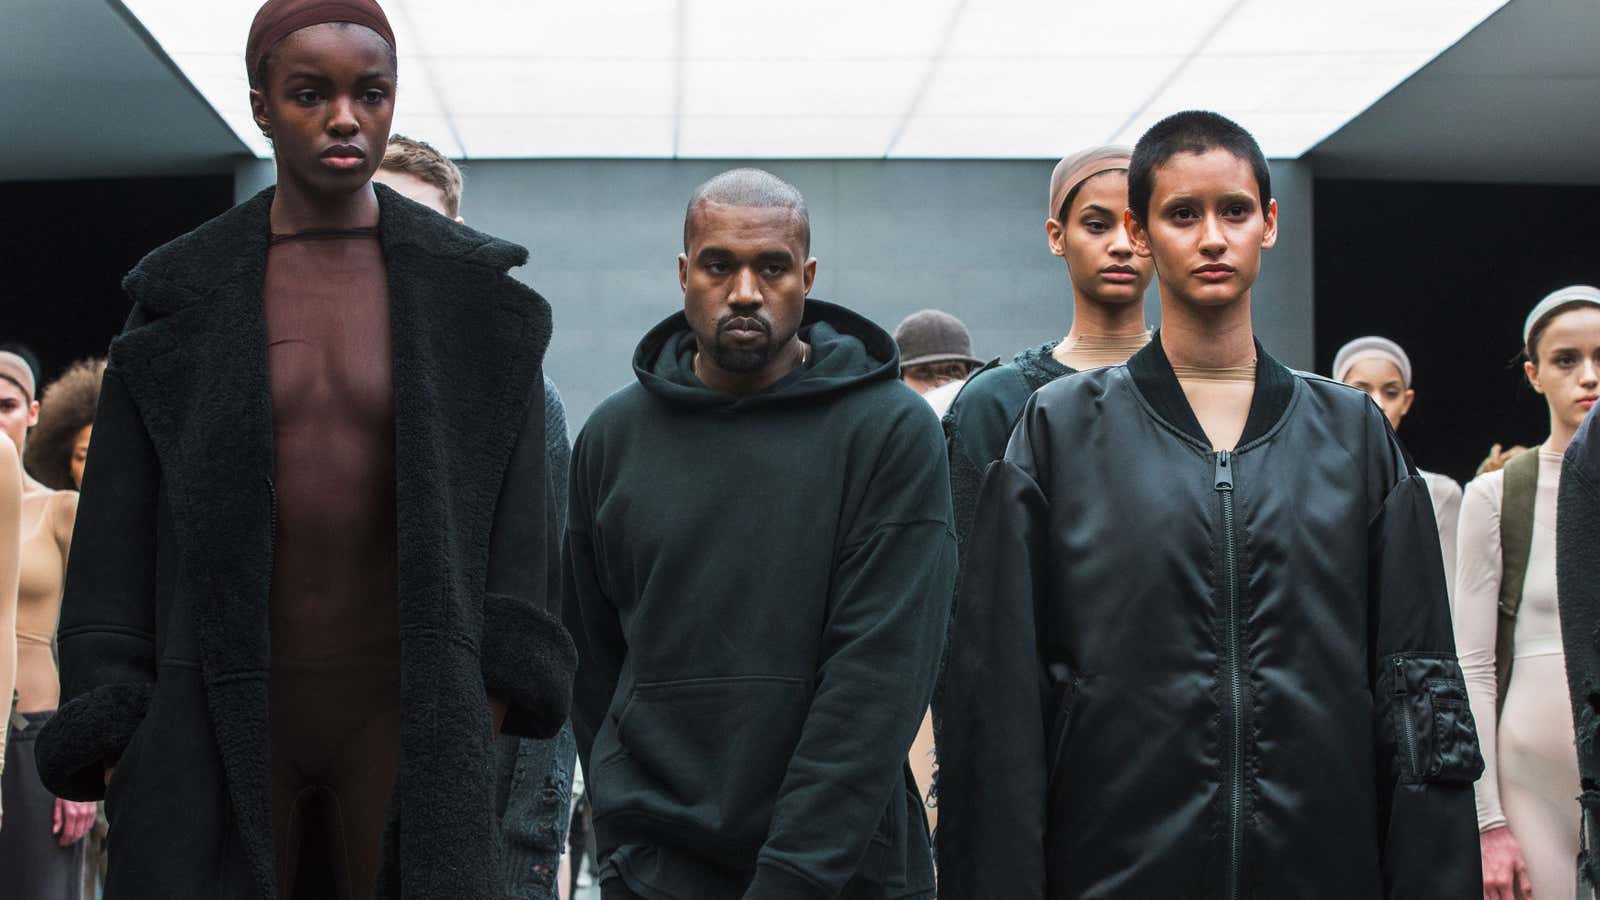 Kanye is coming for you, Lagerfeld.